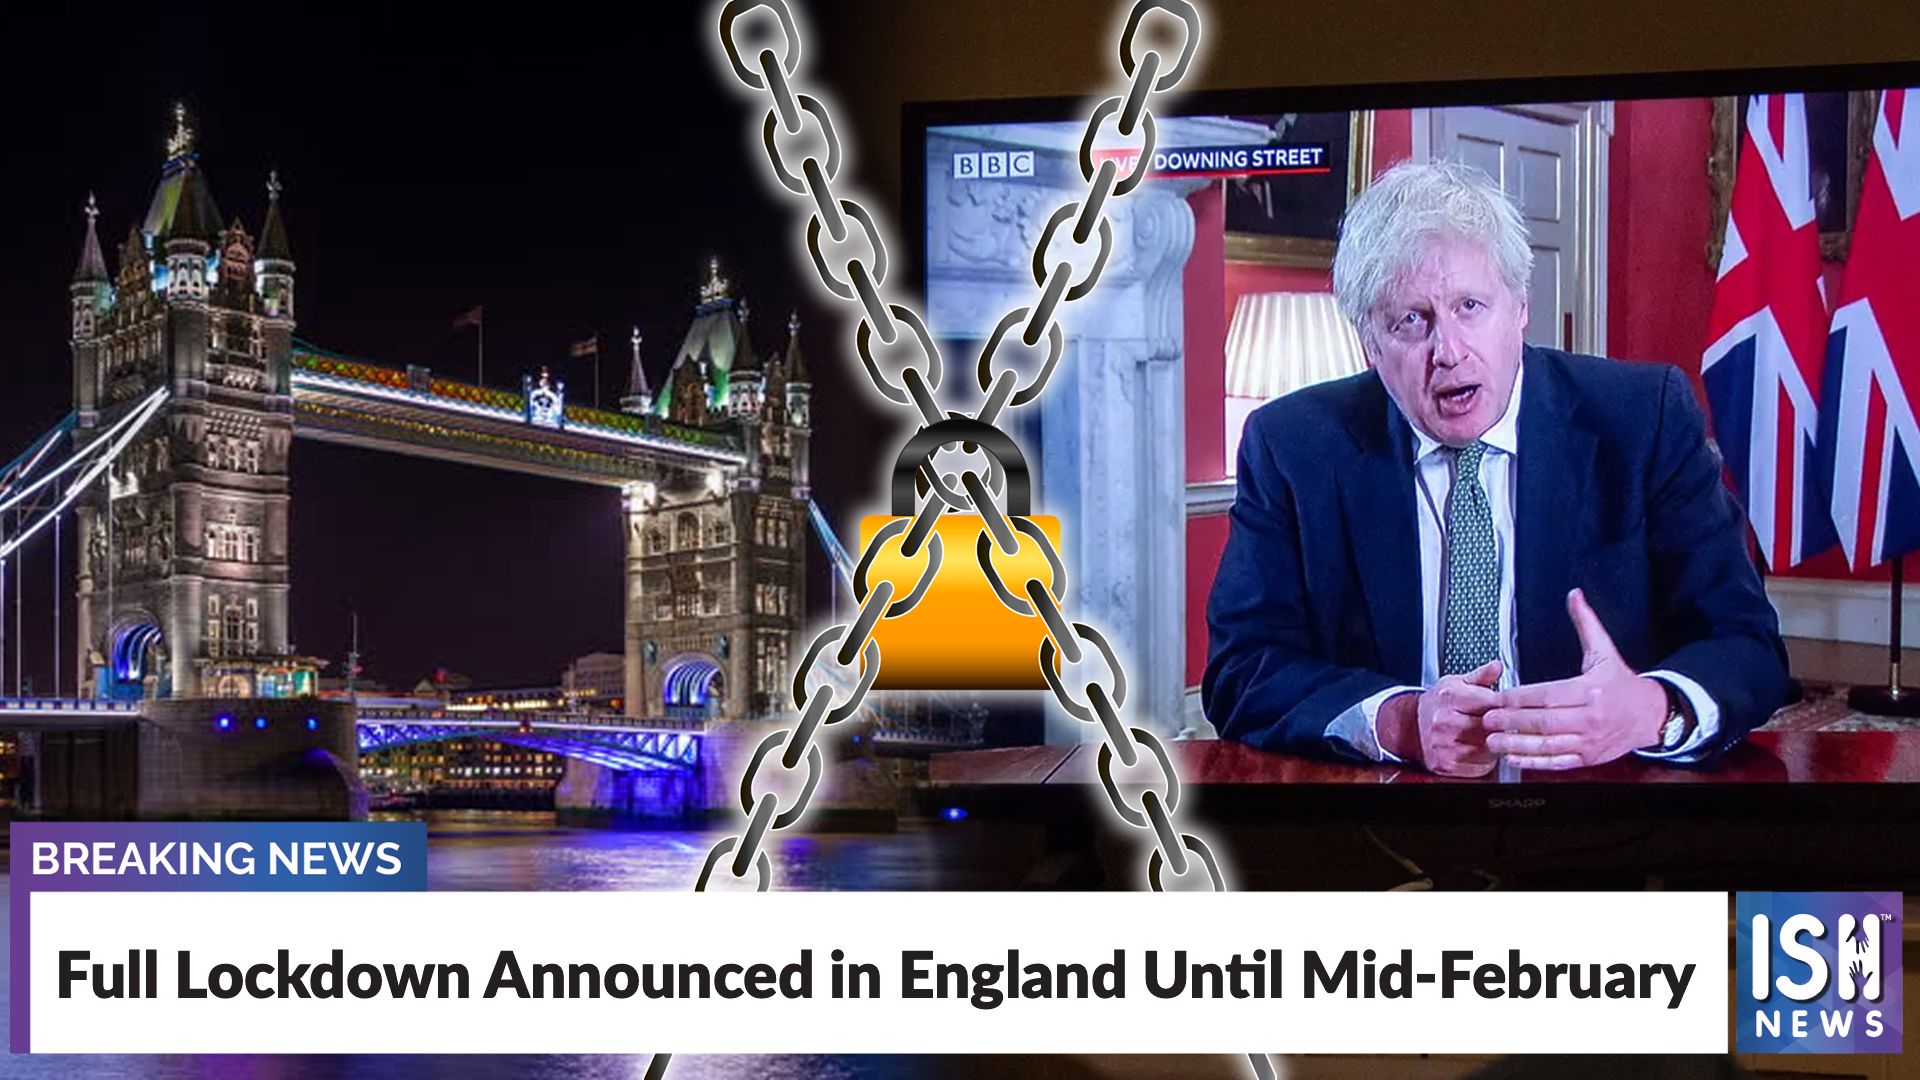 Full Lockdown Announced in England Until Mid-February